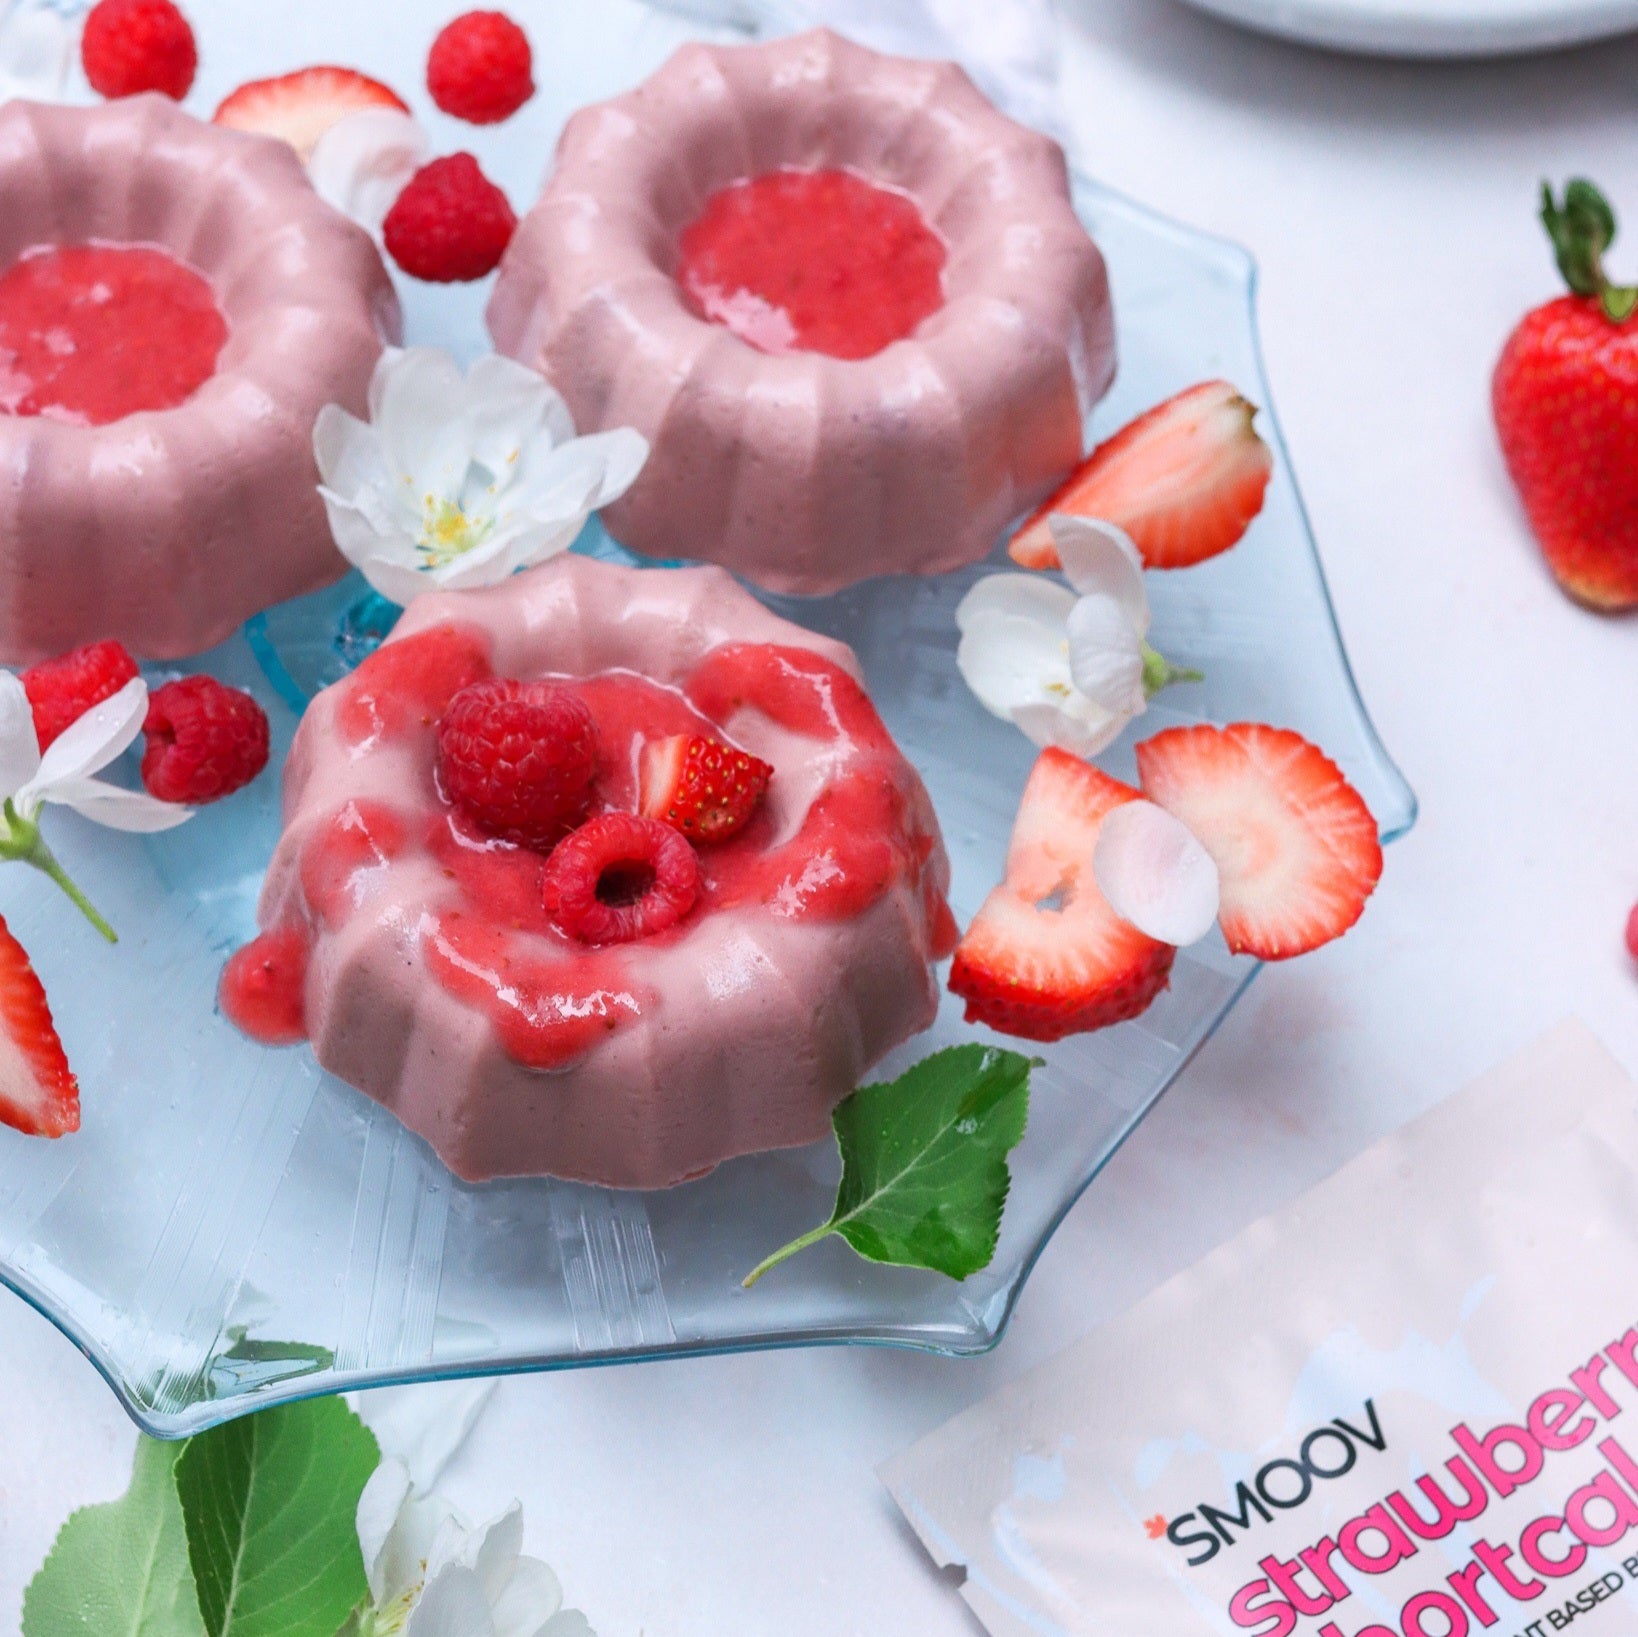 High protein strawberry panna cotta made using smoov all in one strawberry shortcake plant based blend